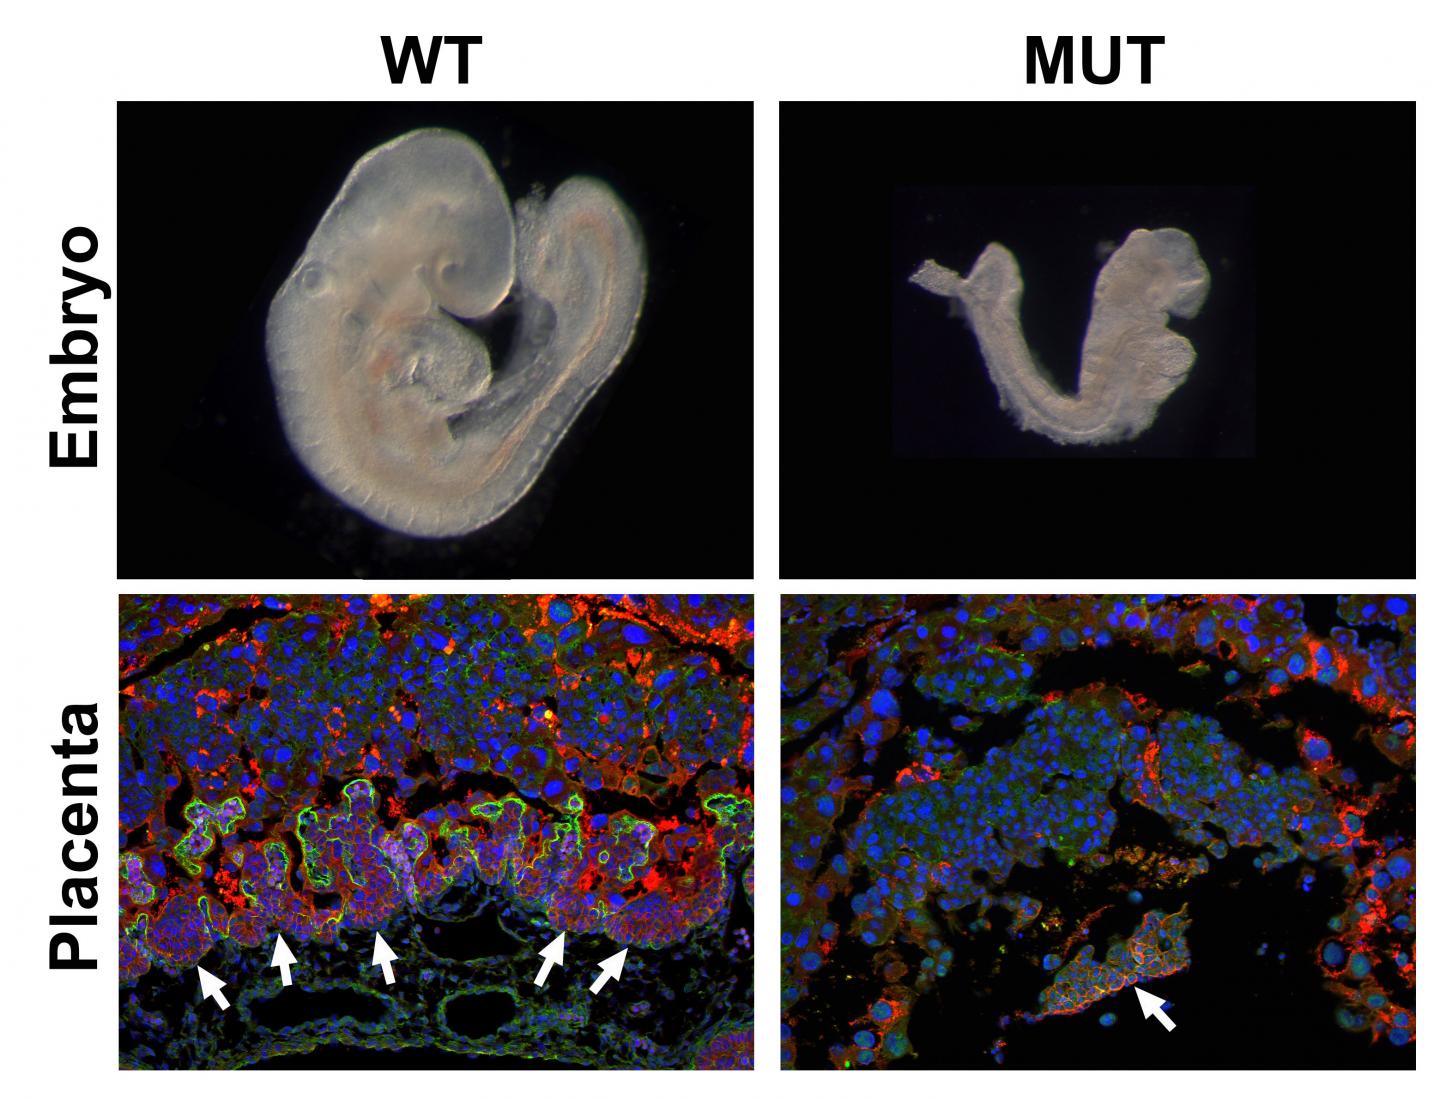 Comparison between Healthy and Mutant Embryo Development